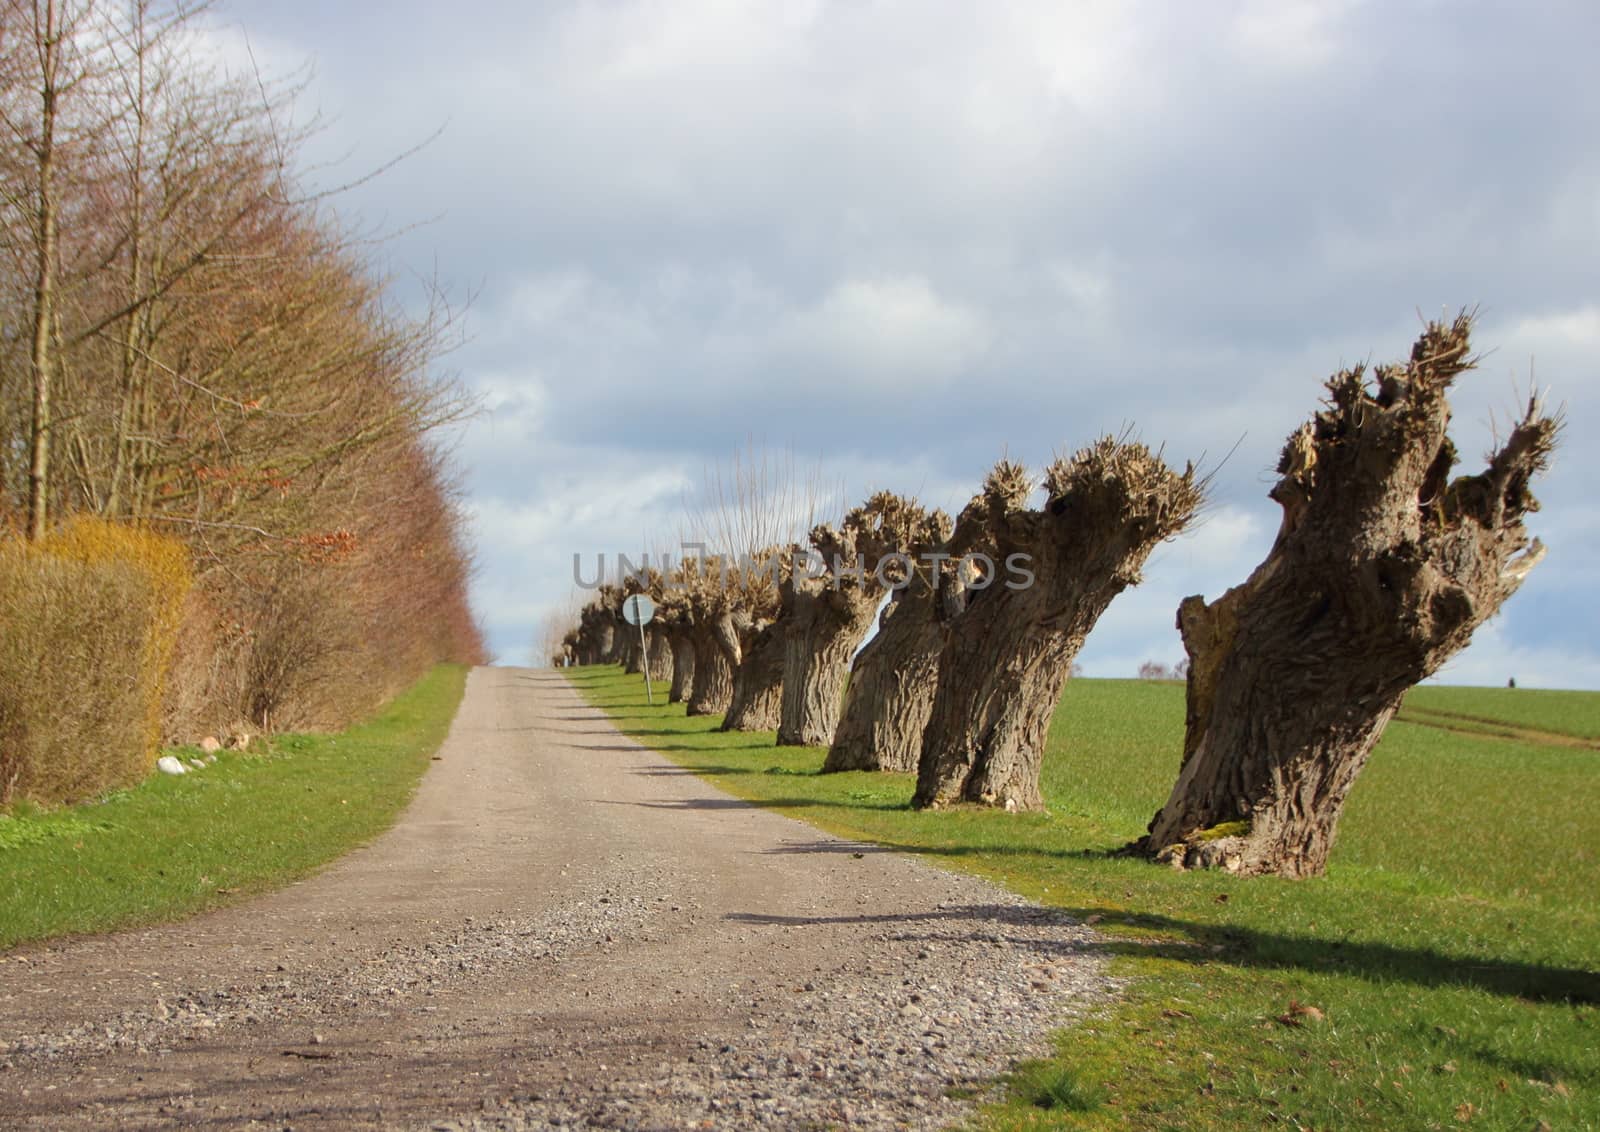 Rural Windy Road with Line of Old Willow Trees by HoleInTheBox